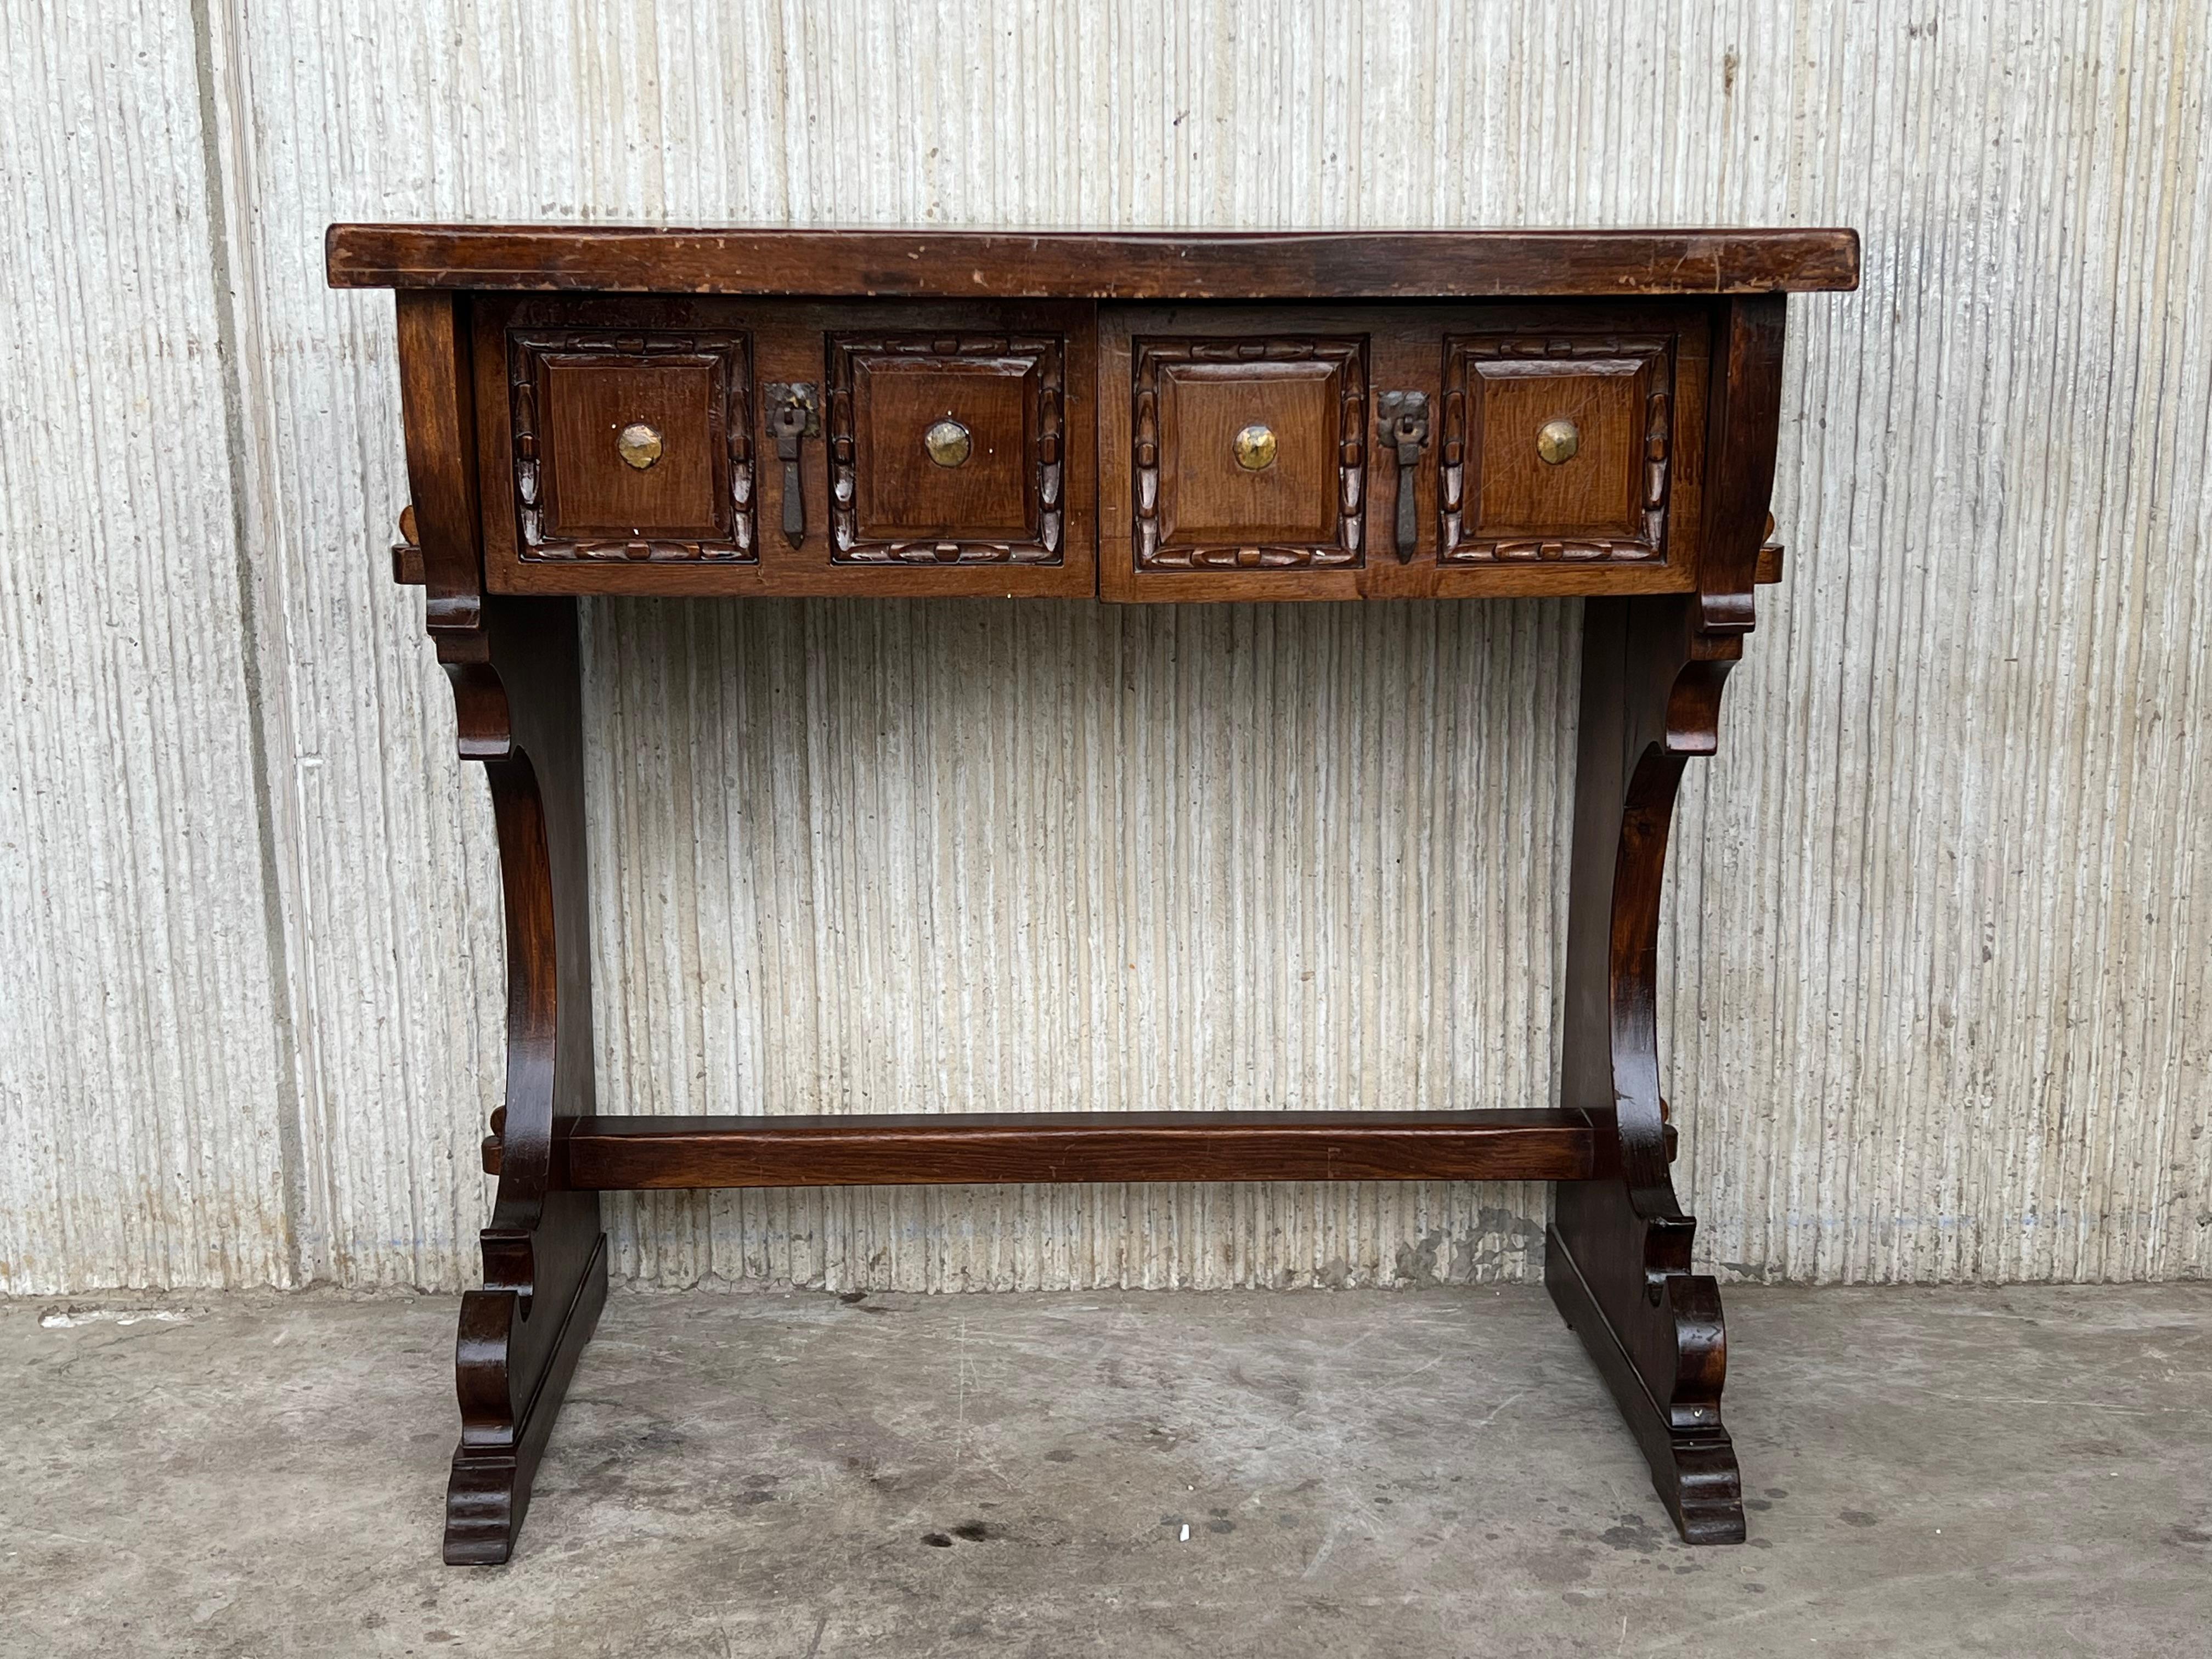 Spanish colonial narrow console table with two carved drawers This piece has a two-pedestal legs with an awesome carved.